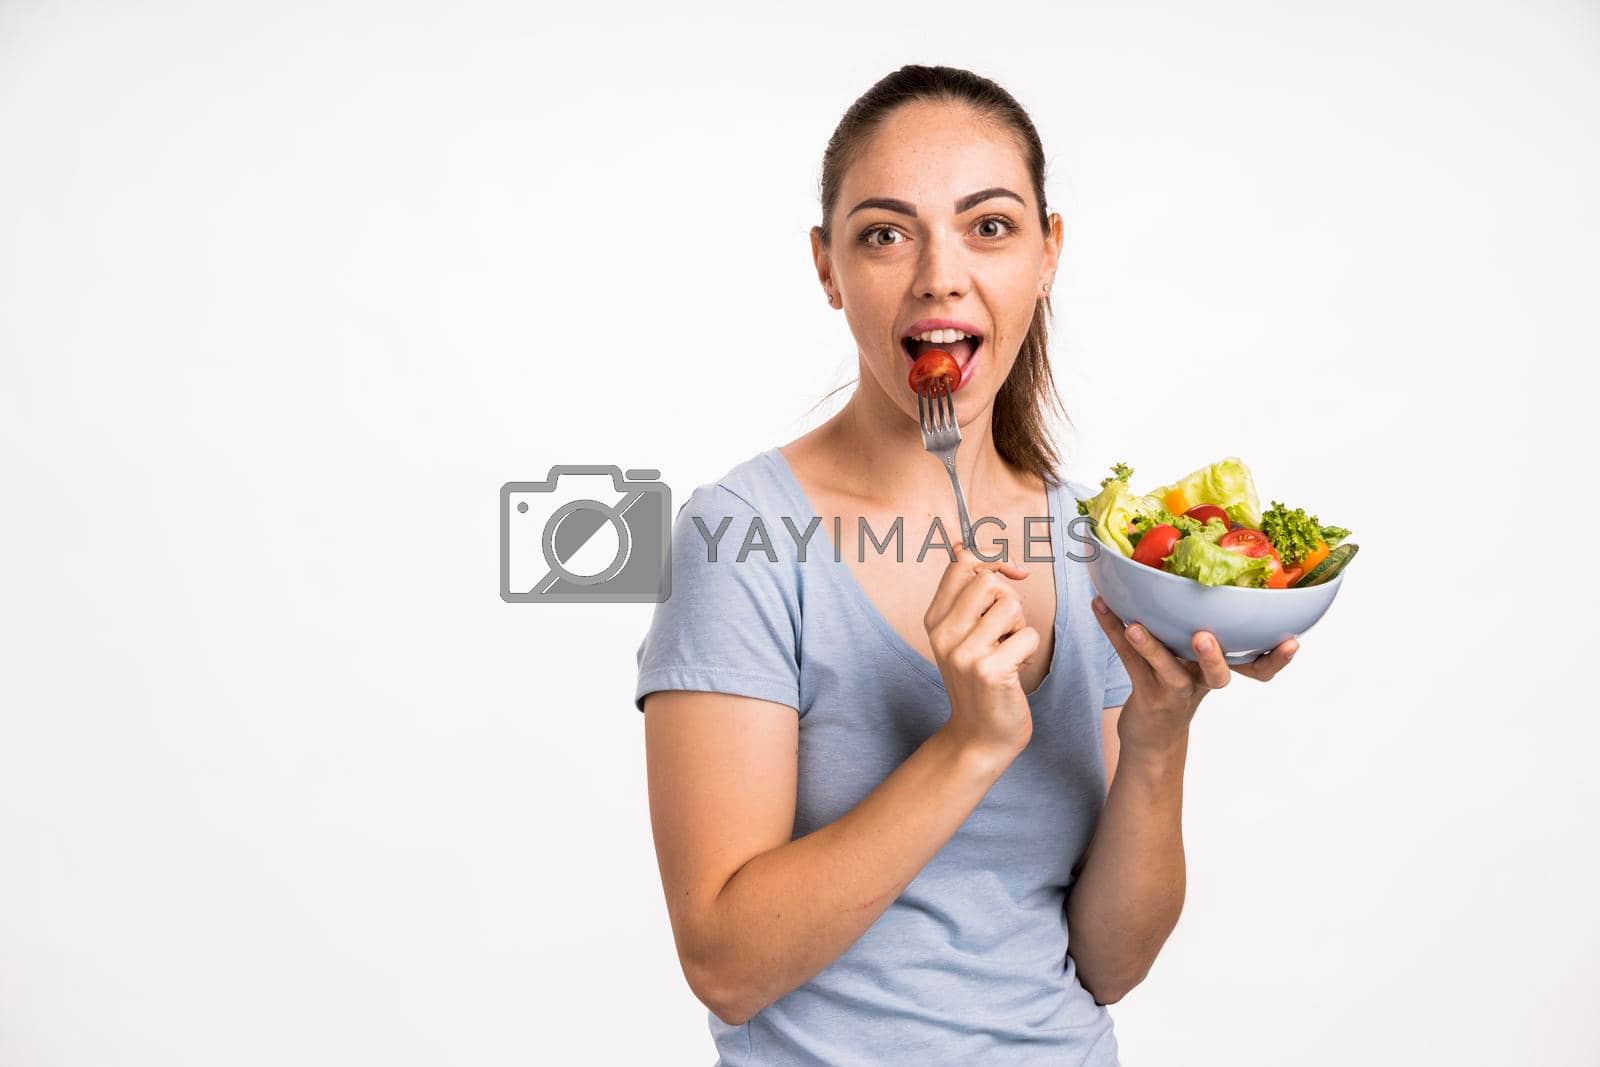 Royalty free image of woman eating tomato with fork by Zahard